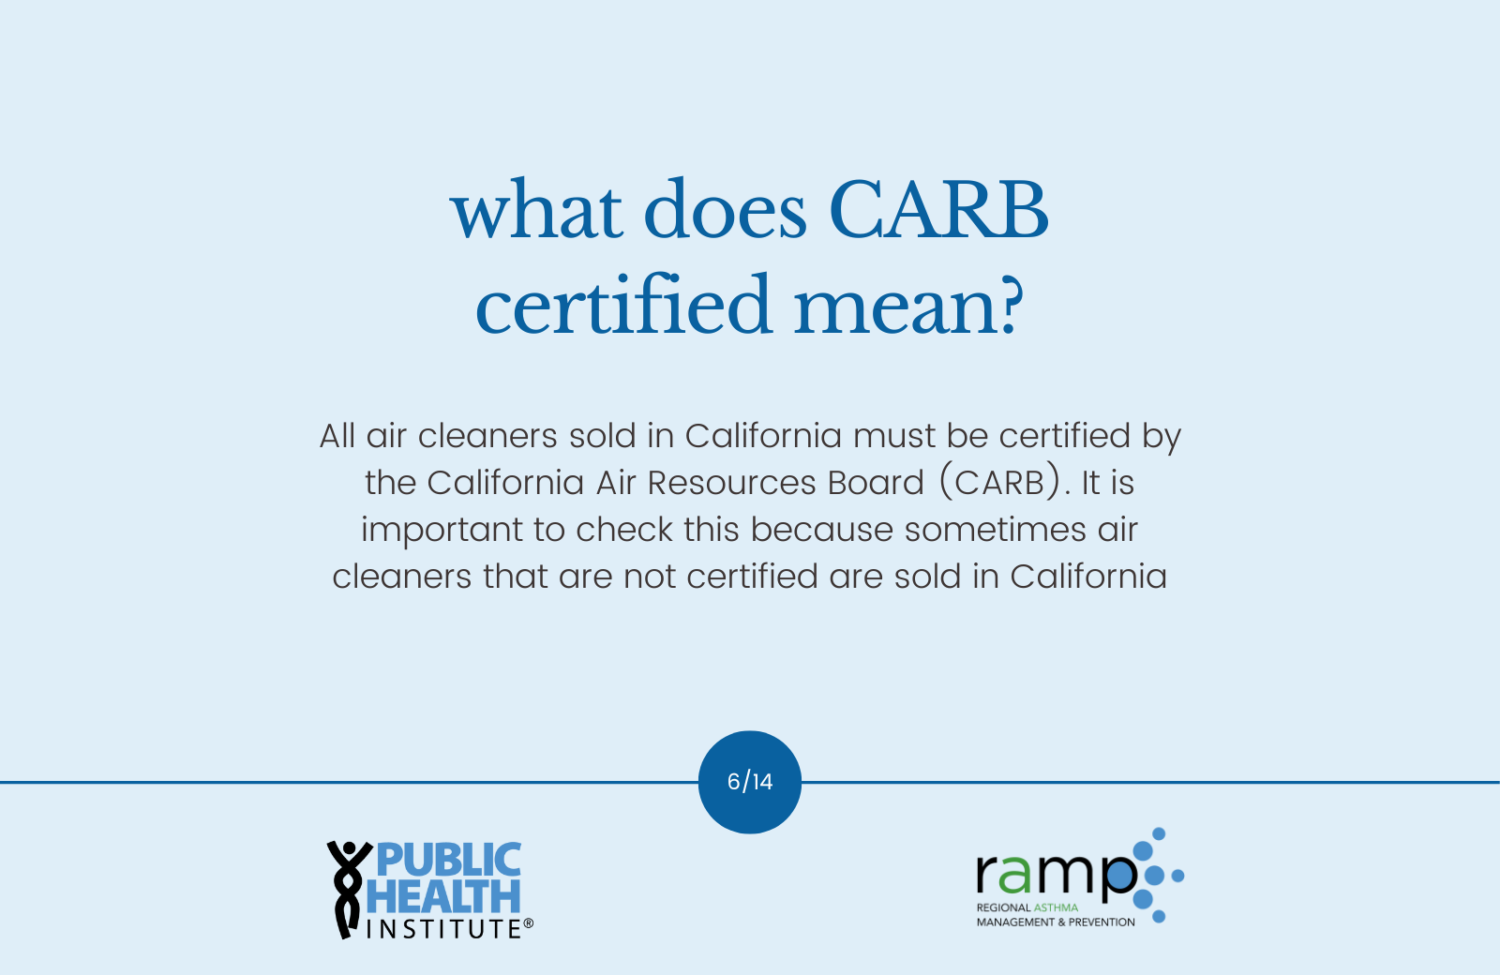 All air cleaners sold in California must be certified by the California Air Resources Board (CARB). It is important to check this because sometimes air cleaners that are not certified are sold in California